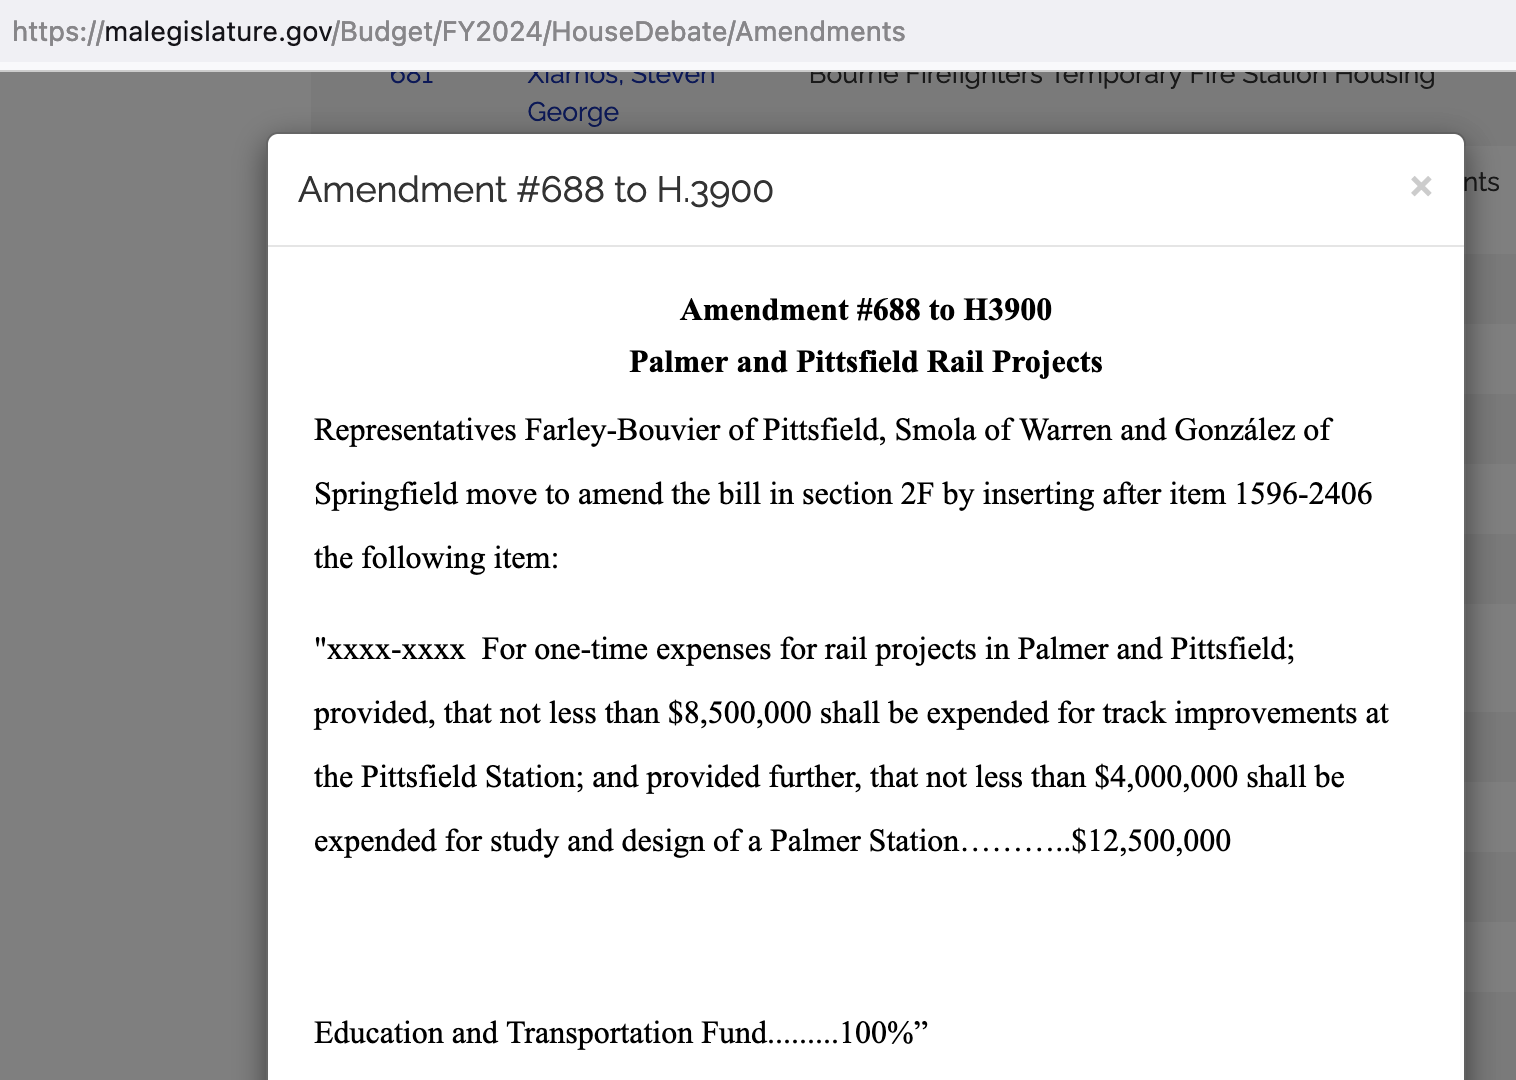 Text of Amendment #688 to H3900, Palmer and Pittsfield Rail Projects.